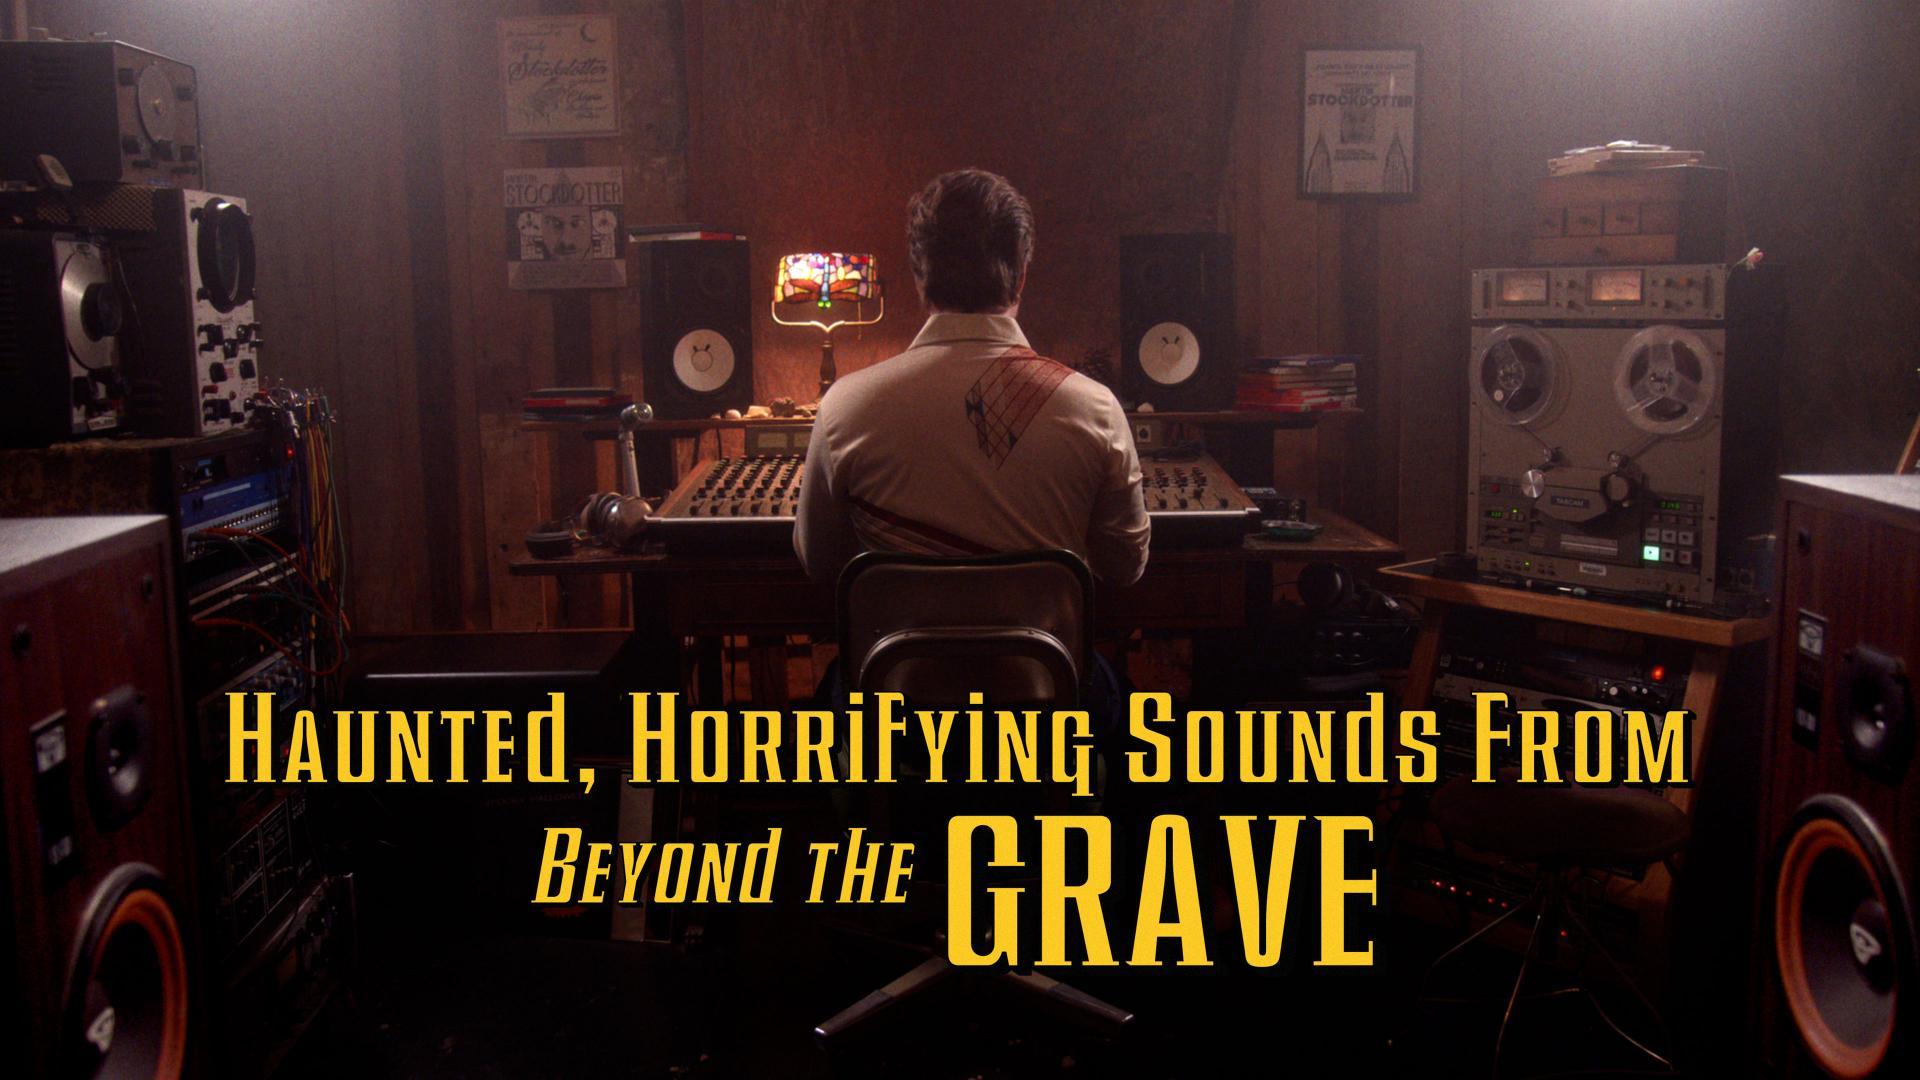 Haunted, Horrifying Sounds from Beyond the Grave (S) - Posters